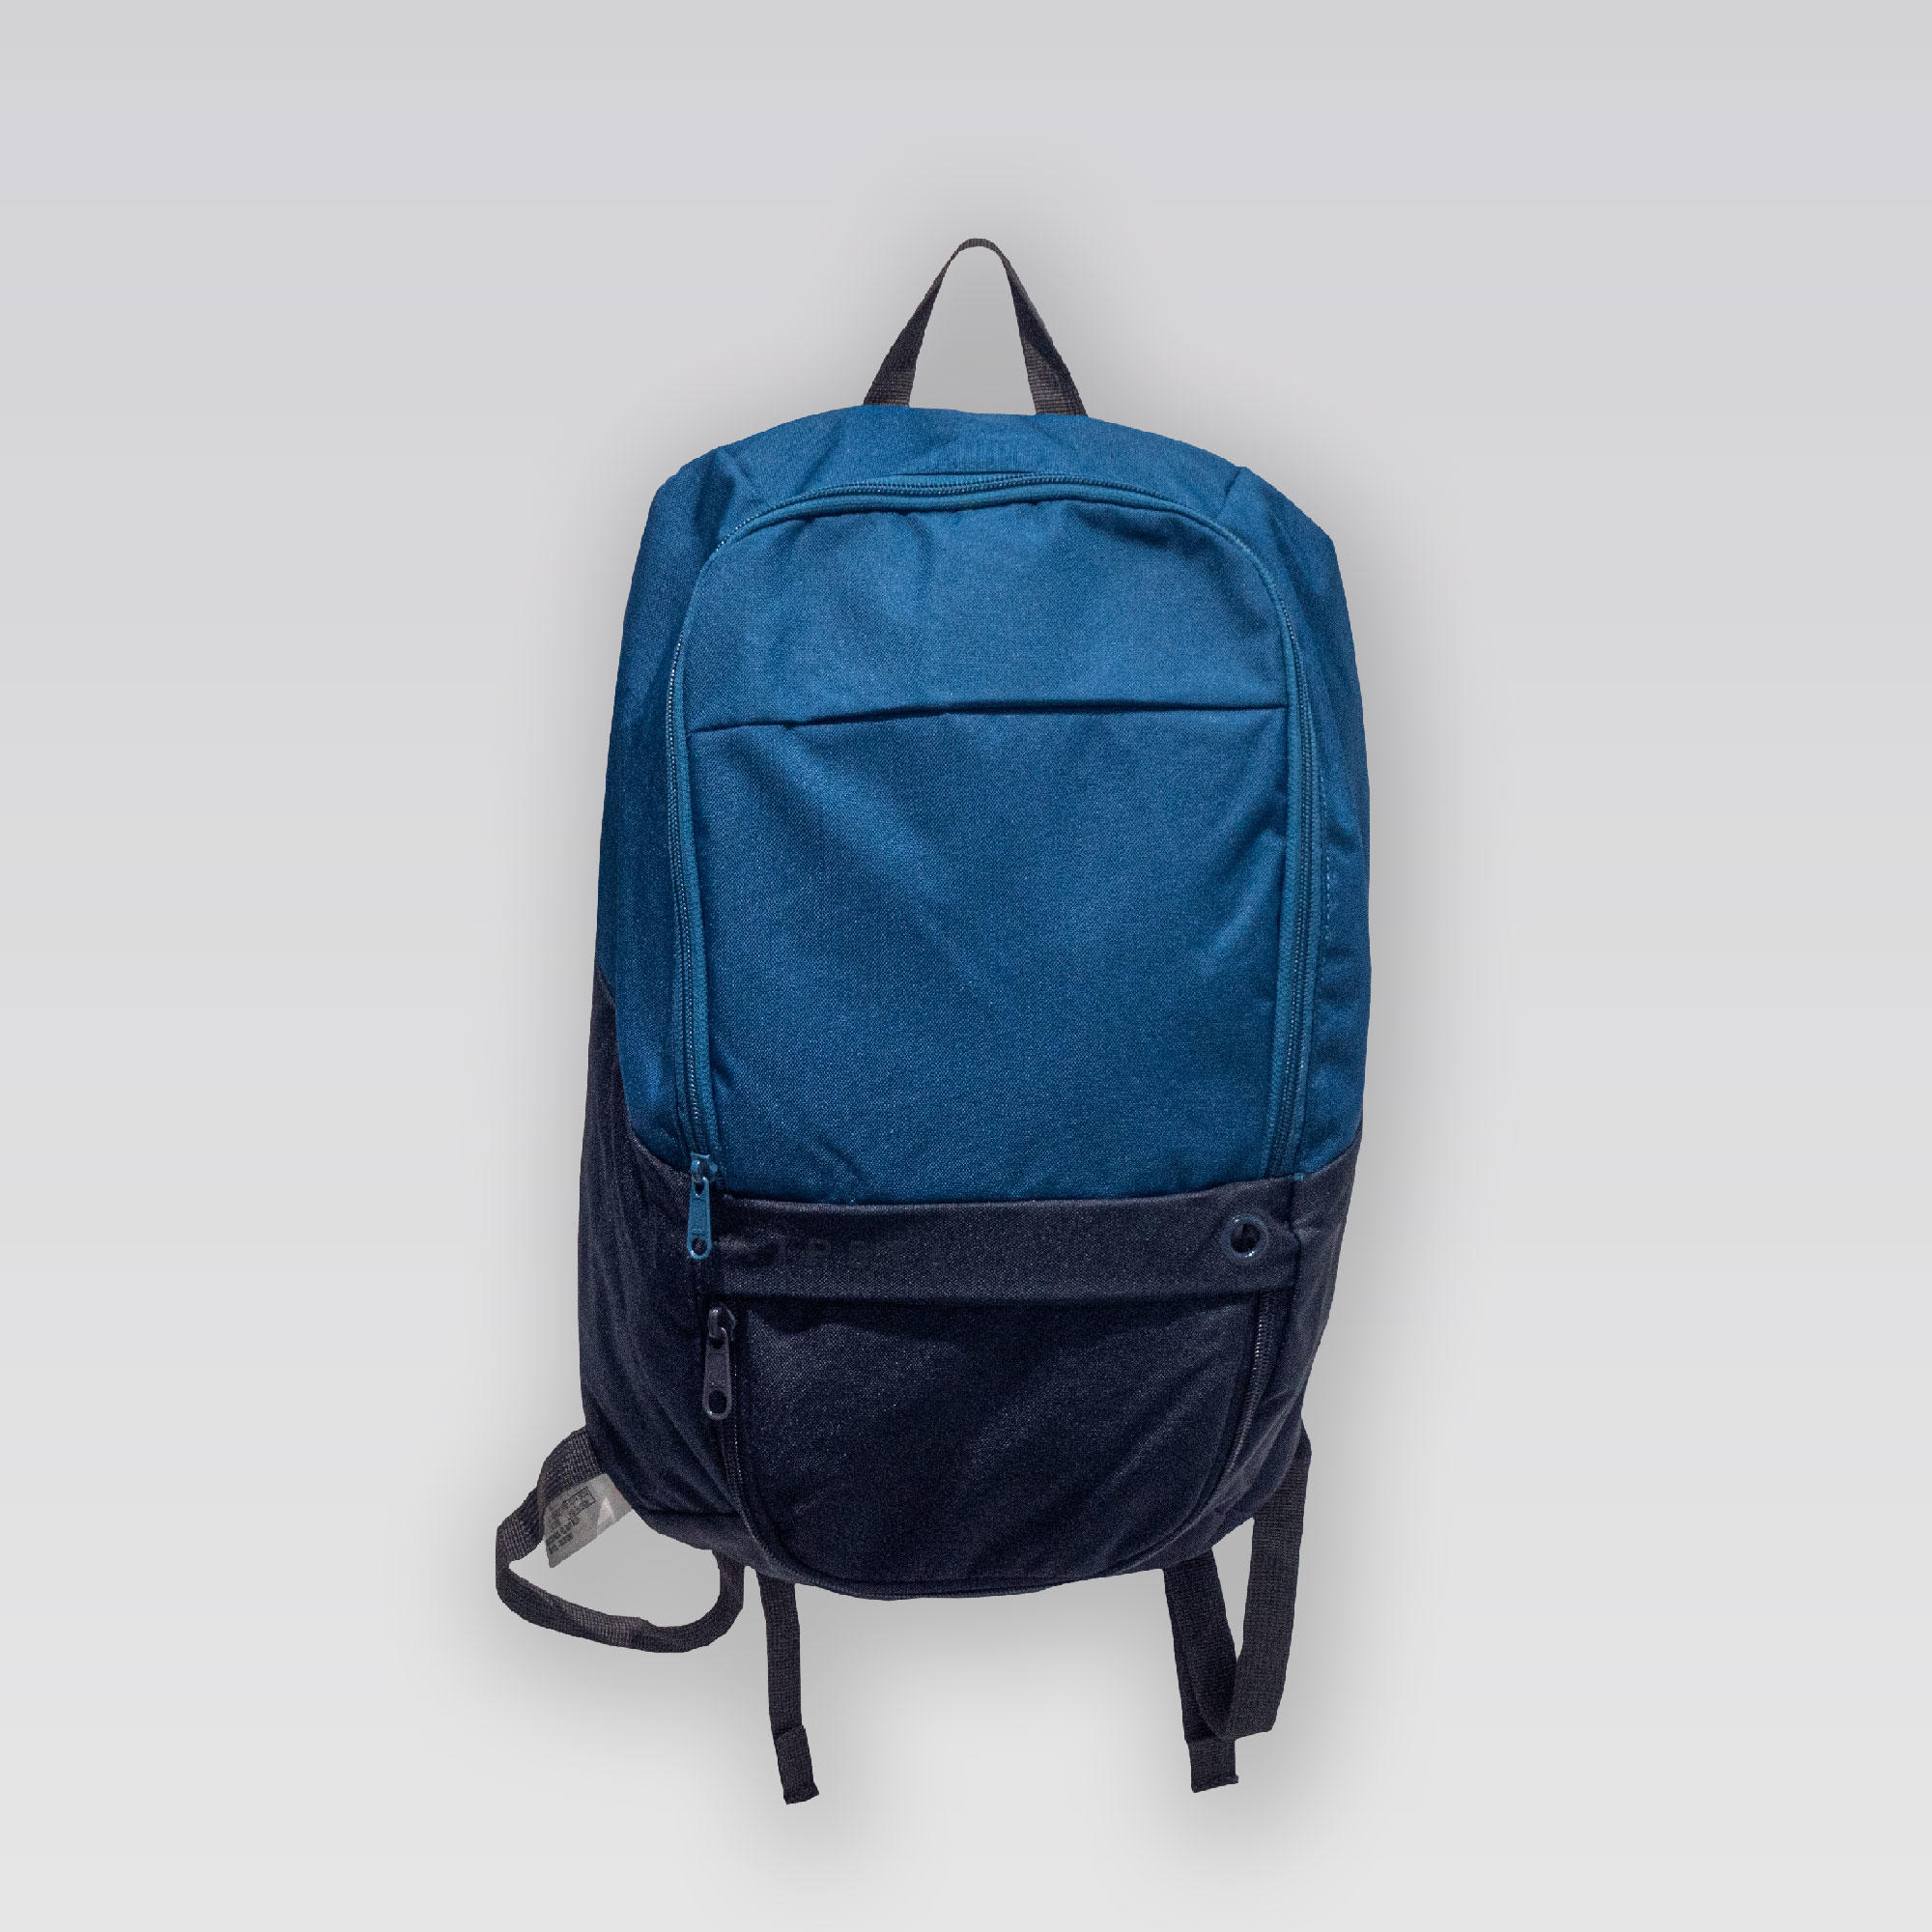 Decathlon Kipsta classic backpack (17/25/35 L) review : r/onebag